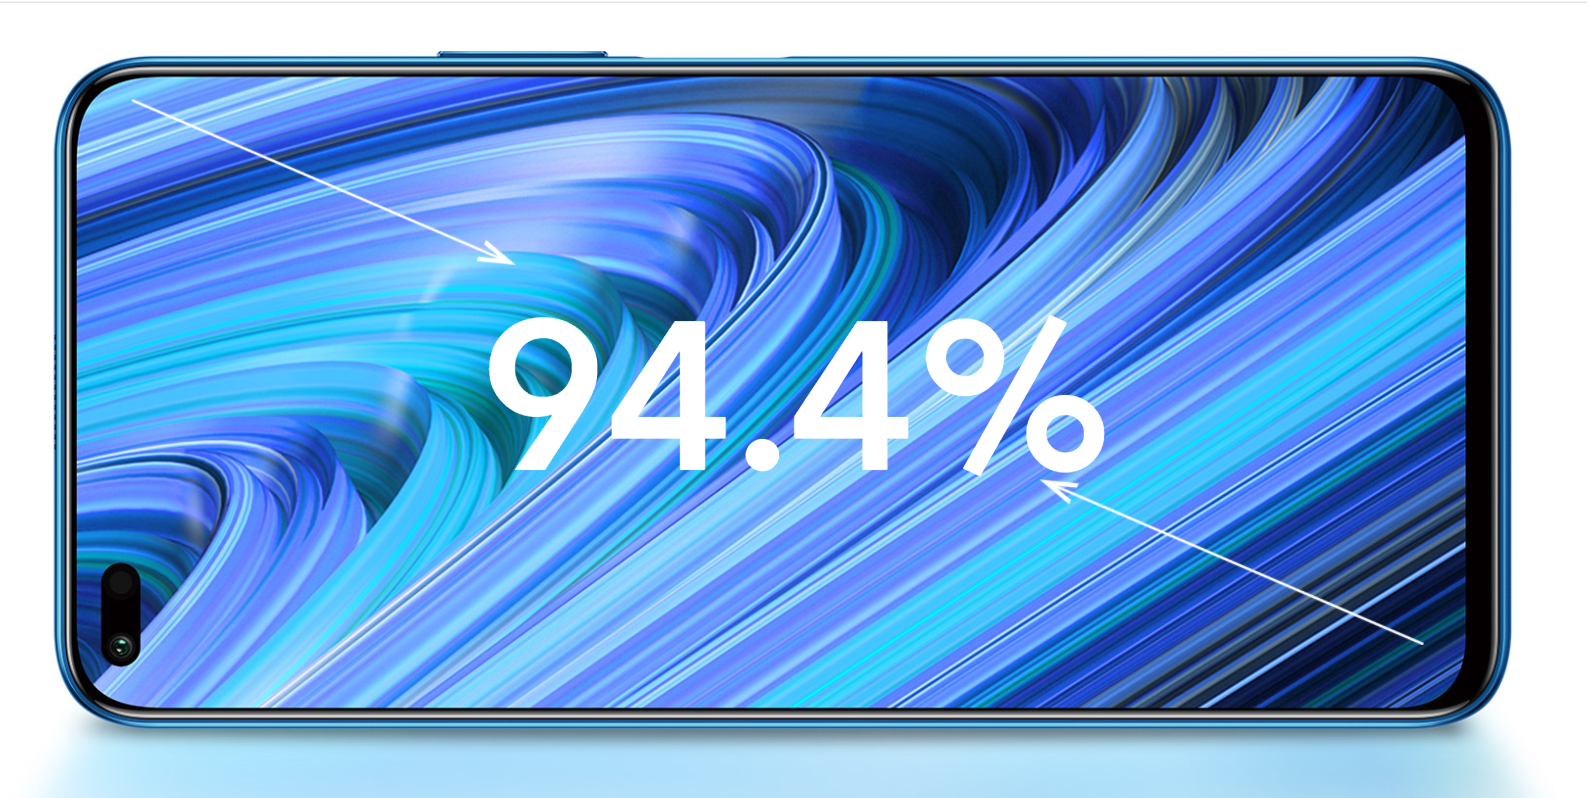 6.67-inch Display with 94.4% screen-to-body ratio